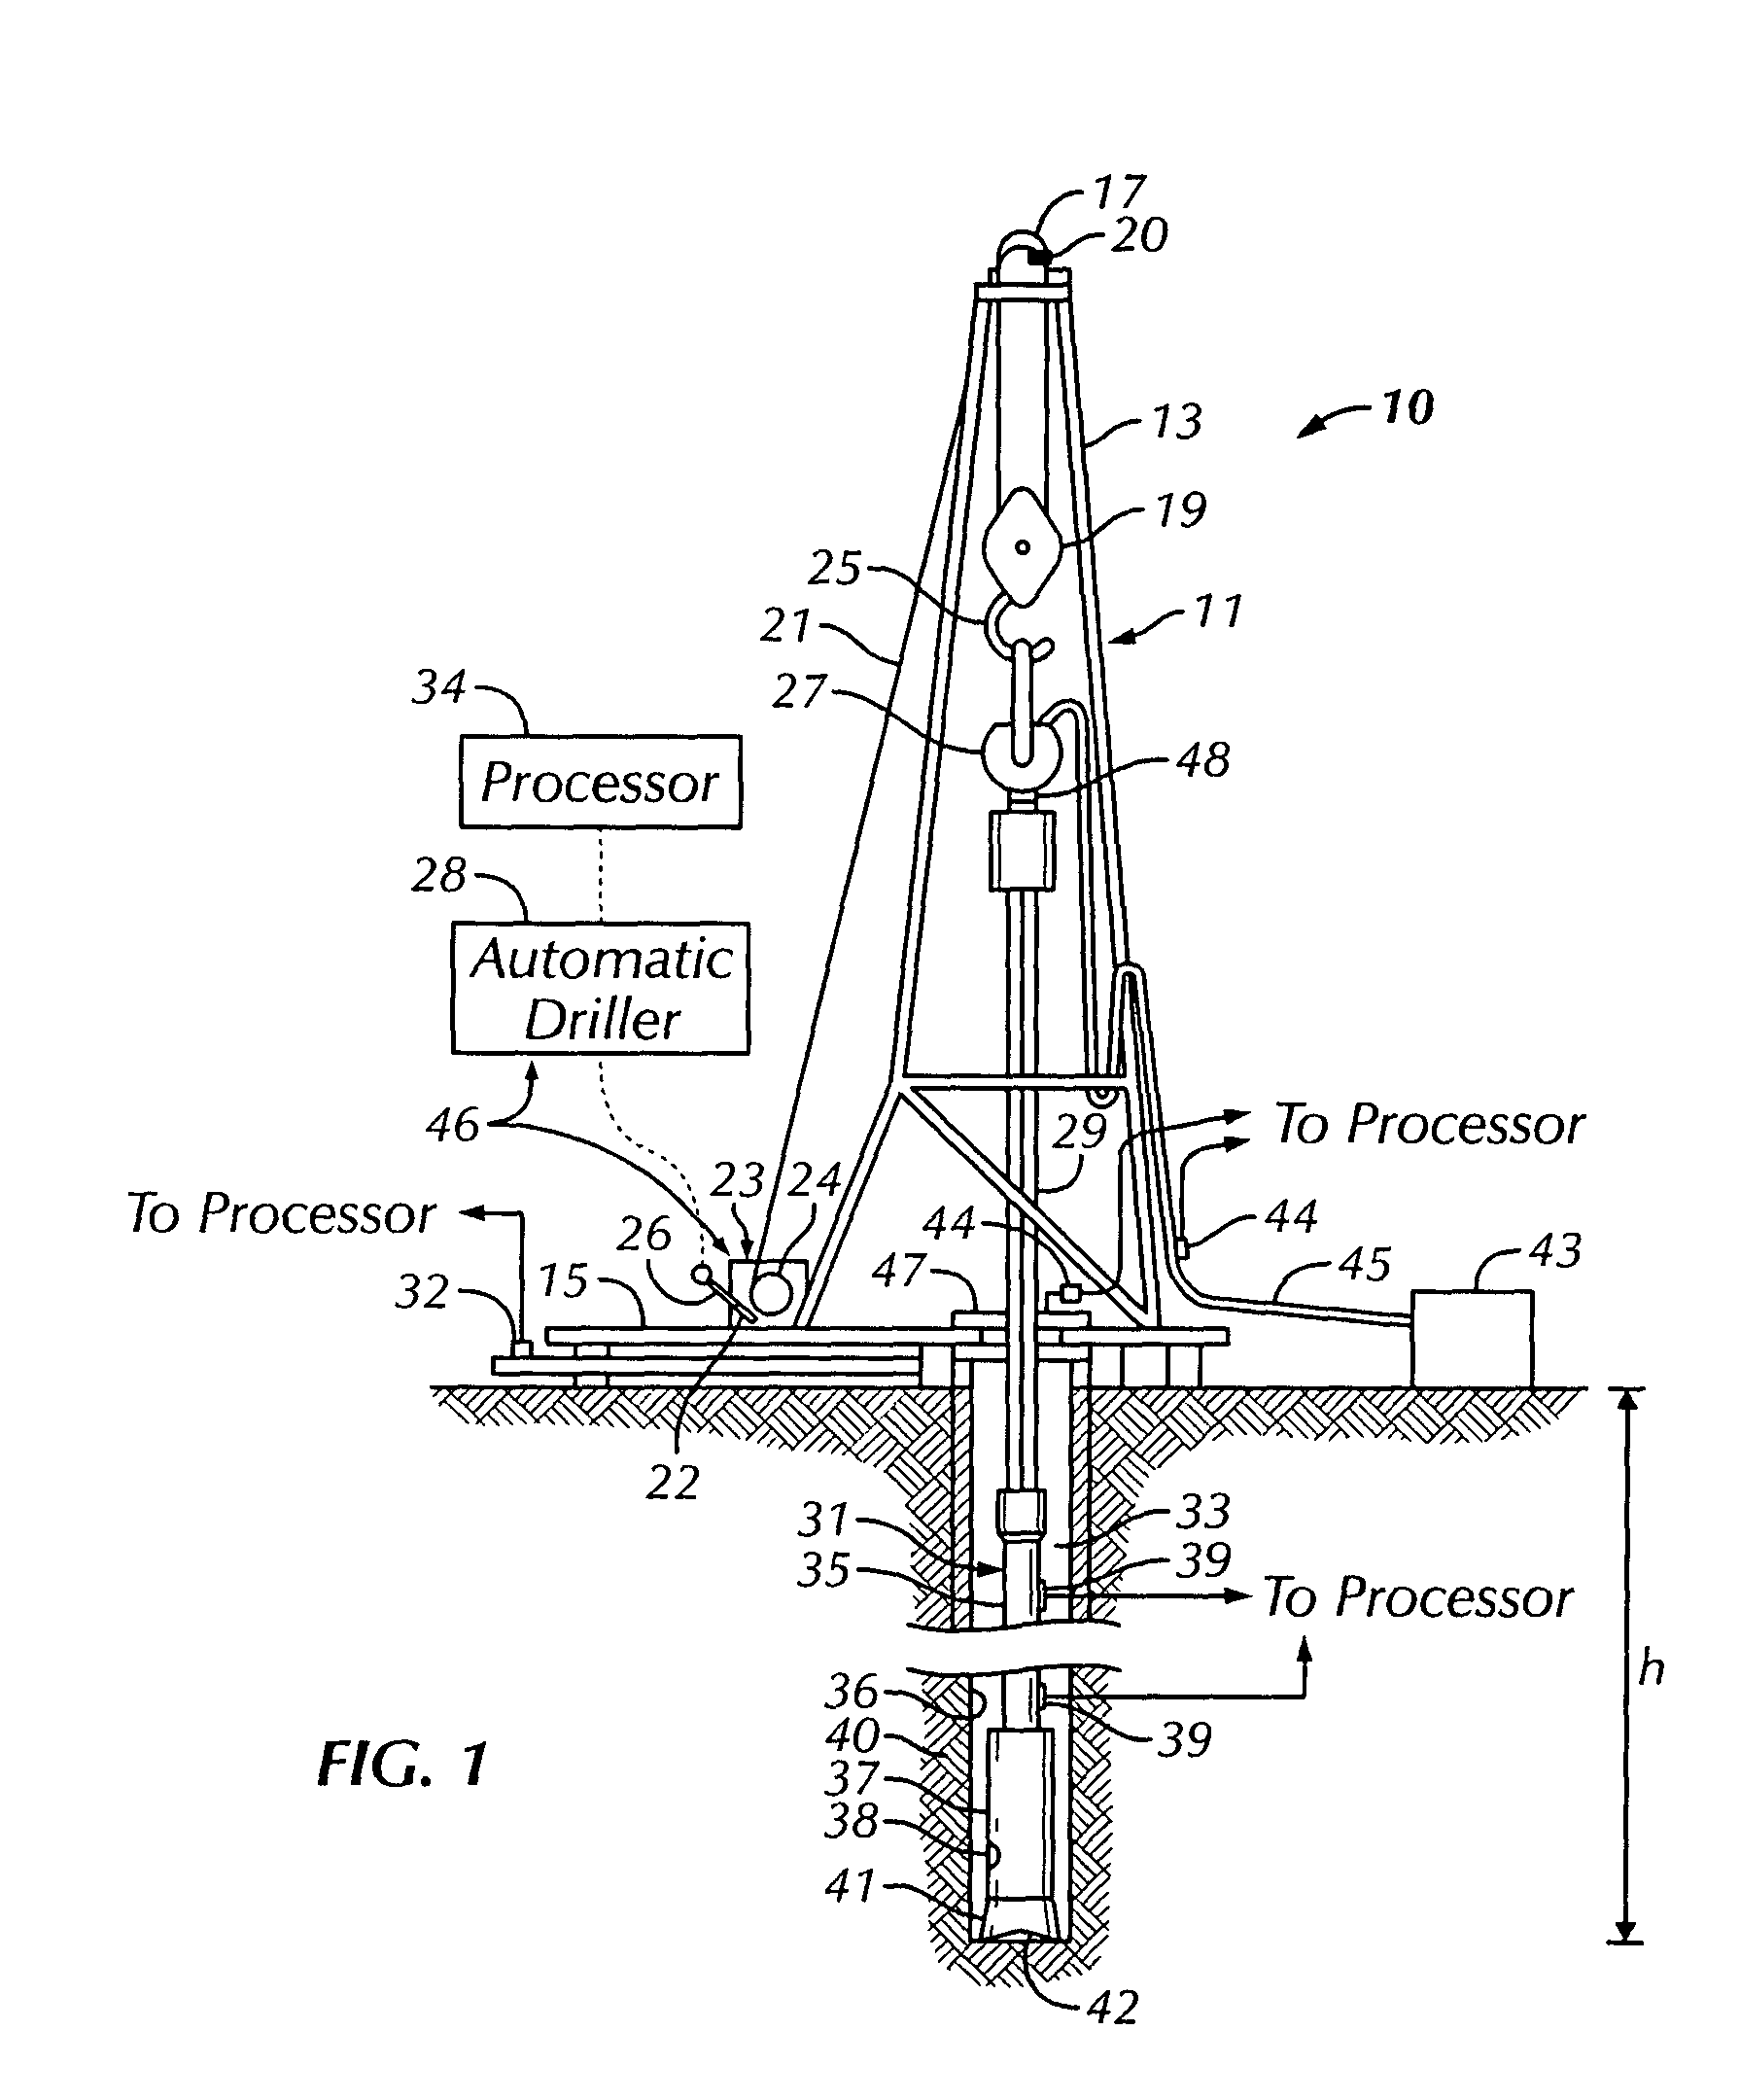 System and method for automatic drilling to maintain equivalent circulating density at a preferred value